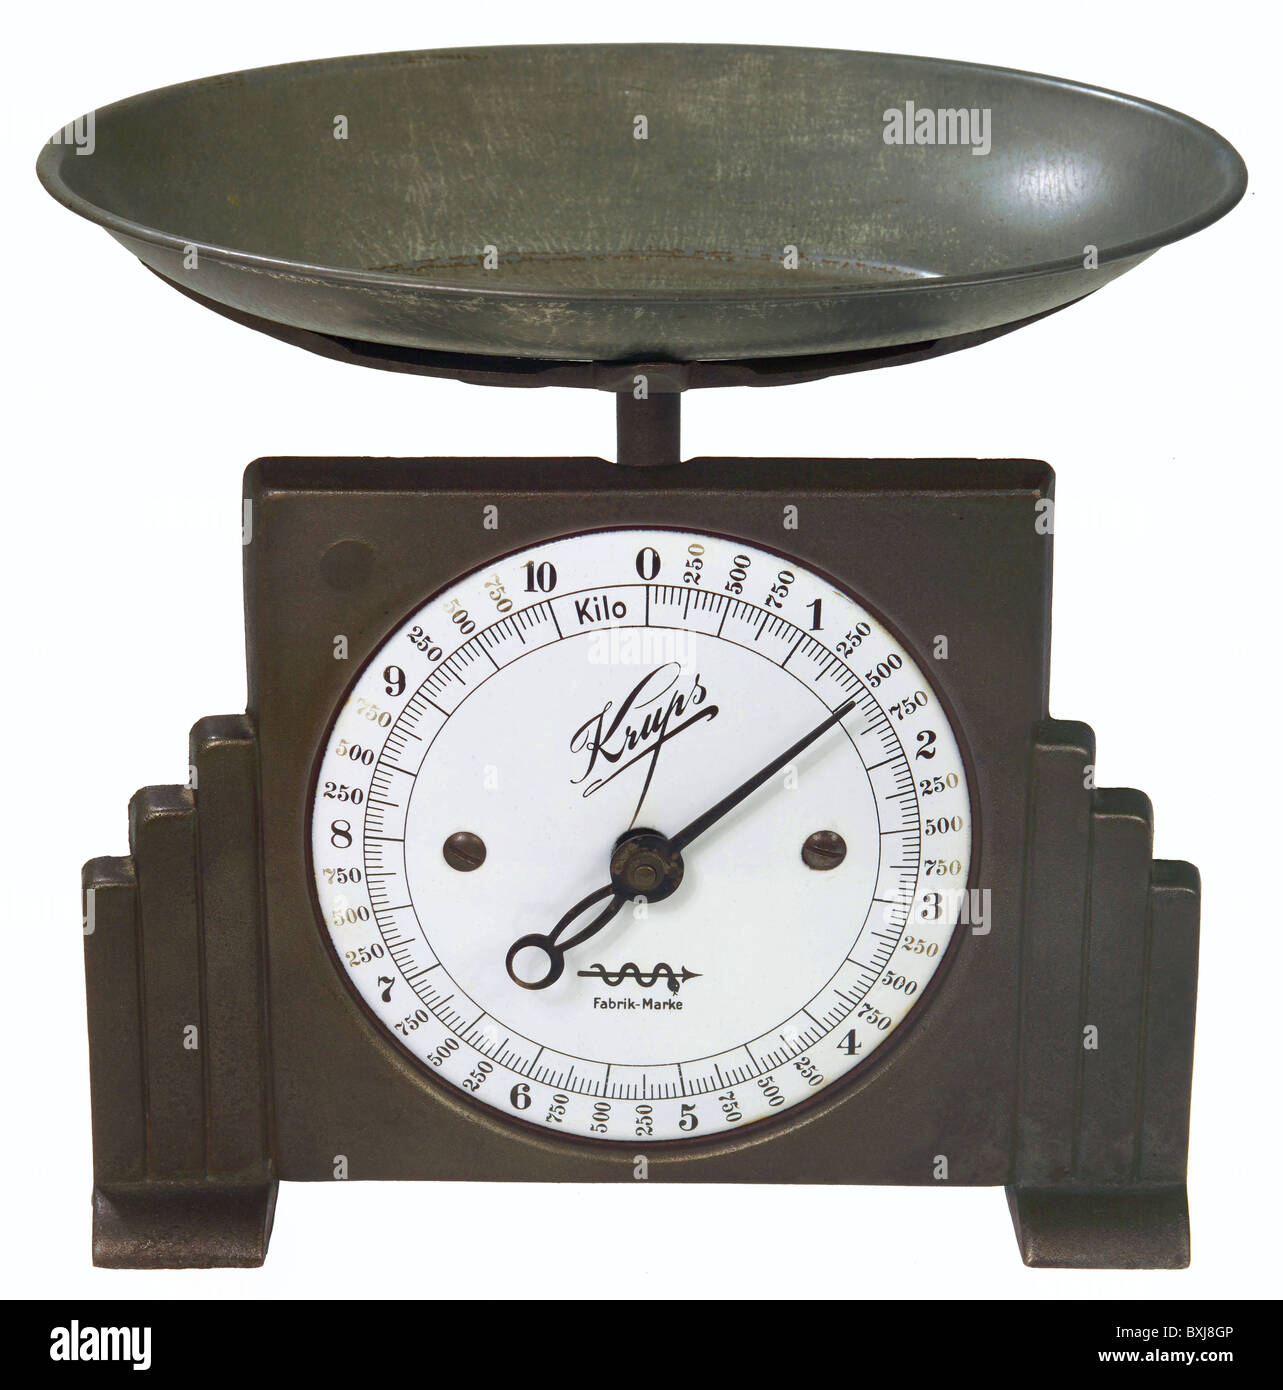 household, kitchen and kitchenware, scales, weight, Germany, circa 1913, Additional-Rights-Clearences-Not Available Stock Photo